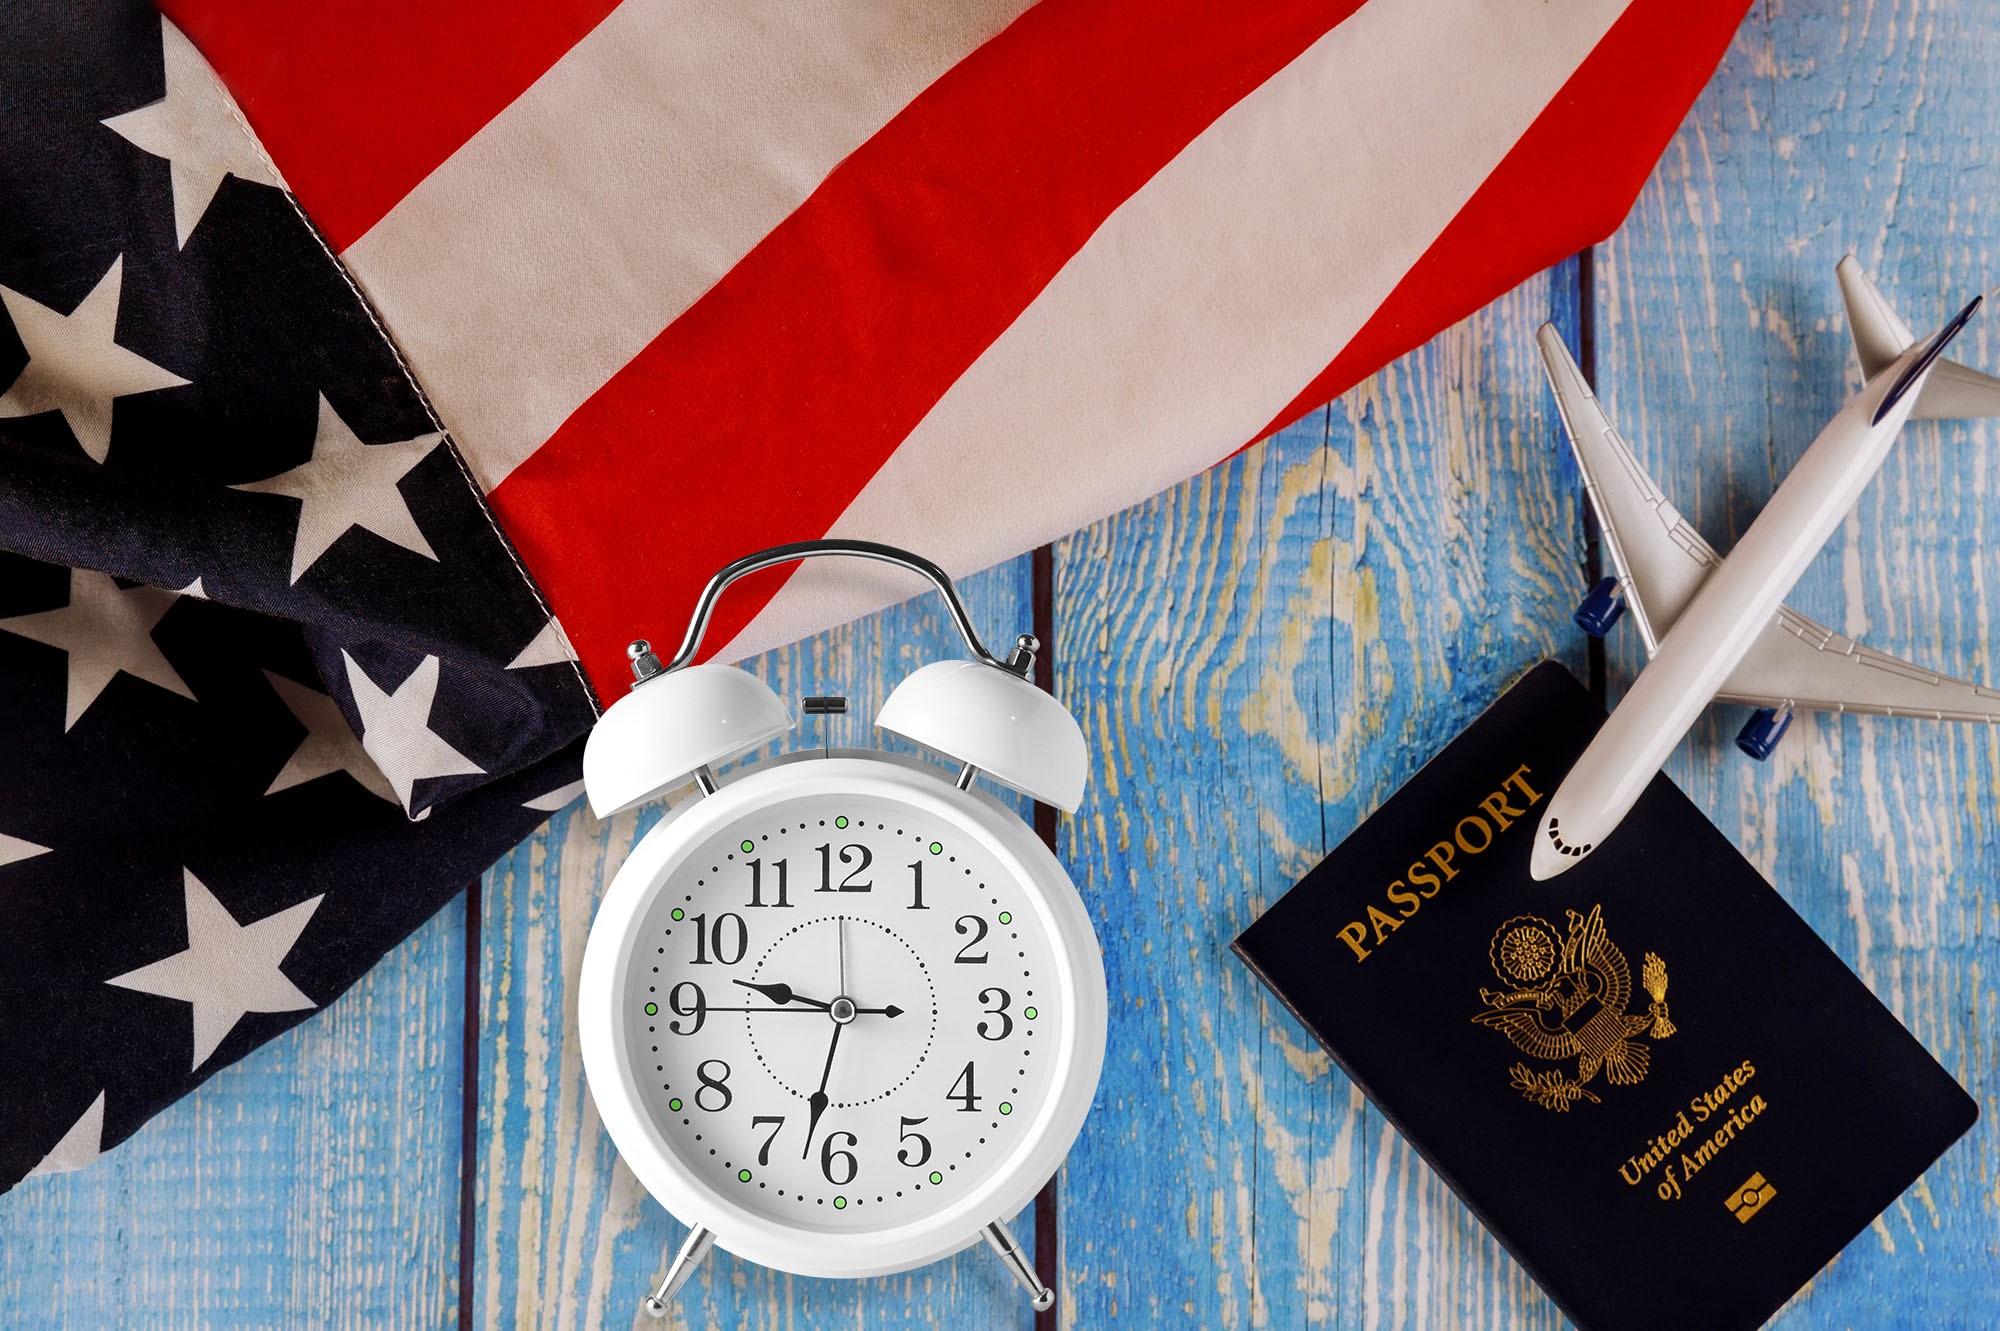 Travel tourism, emigration the USA American flag with U.S. passport and passenger model plane airplane